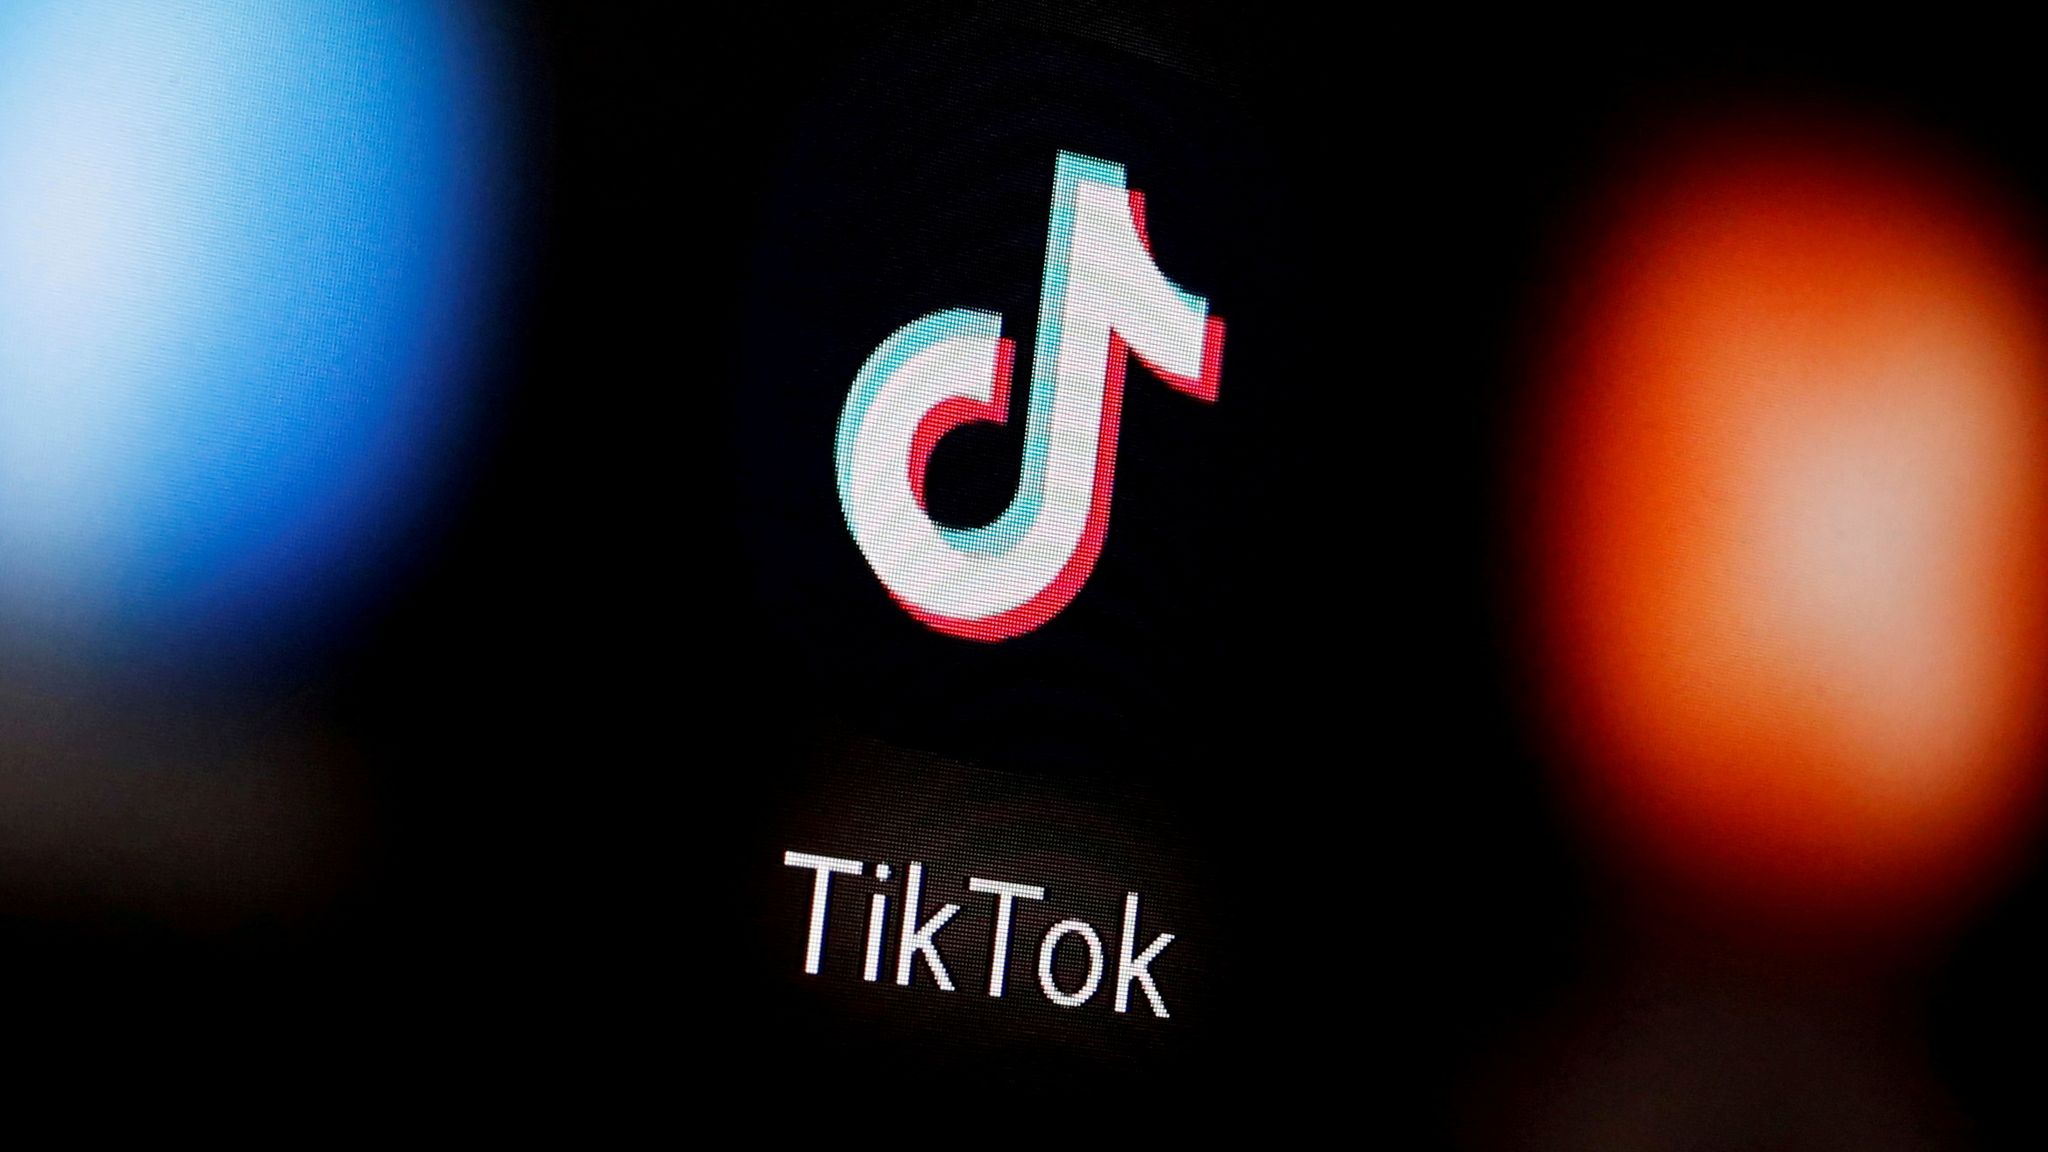 Montana has Passed a TikTok Ban. Here's What Residents Need To